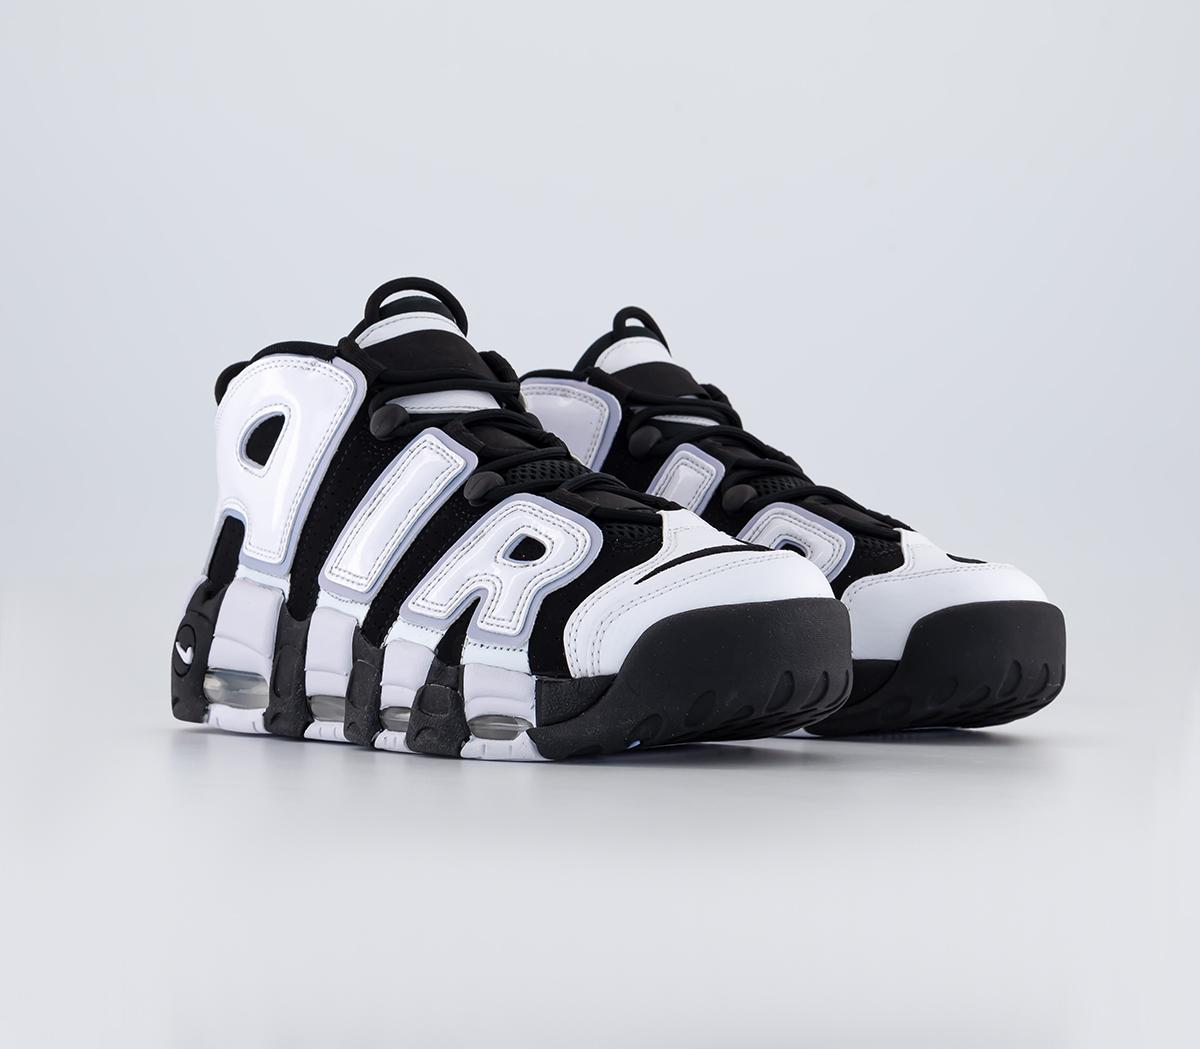 Nike Air More Uptempo 96 Trainers Black White Multi Color Cobalt Bliss, 10